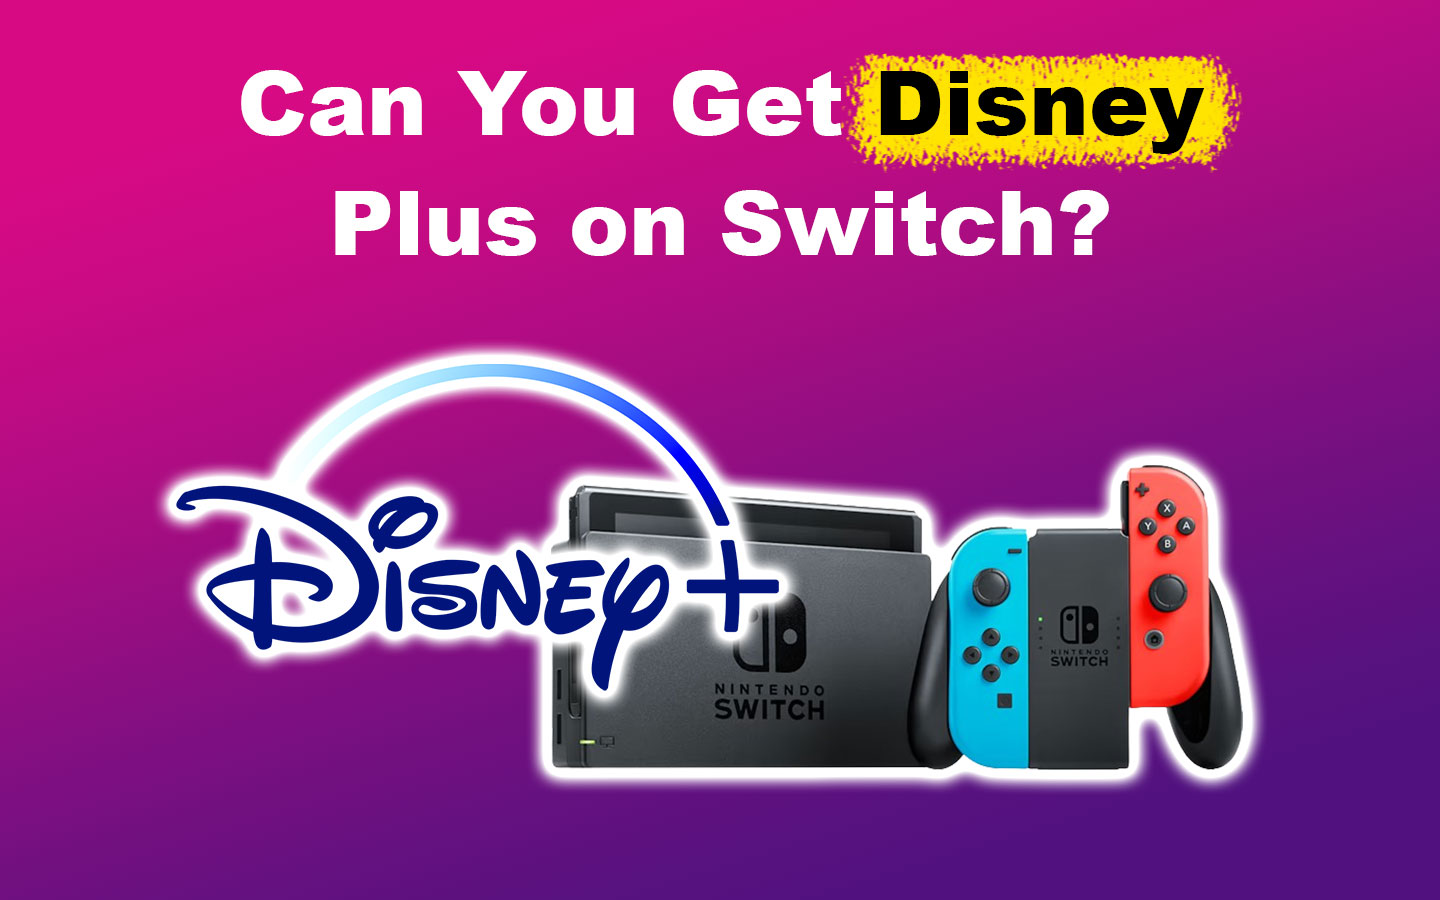 Can You Get Disney Plus on Switch